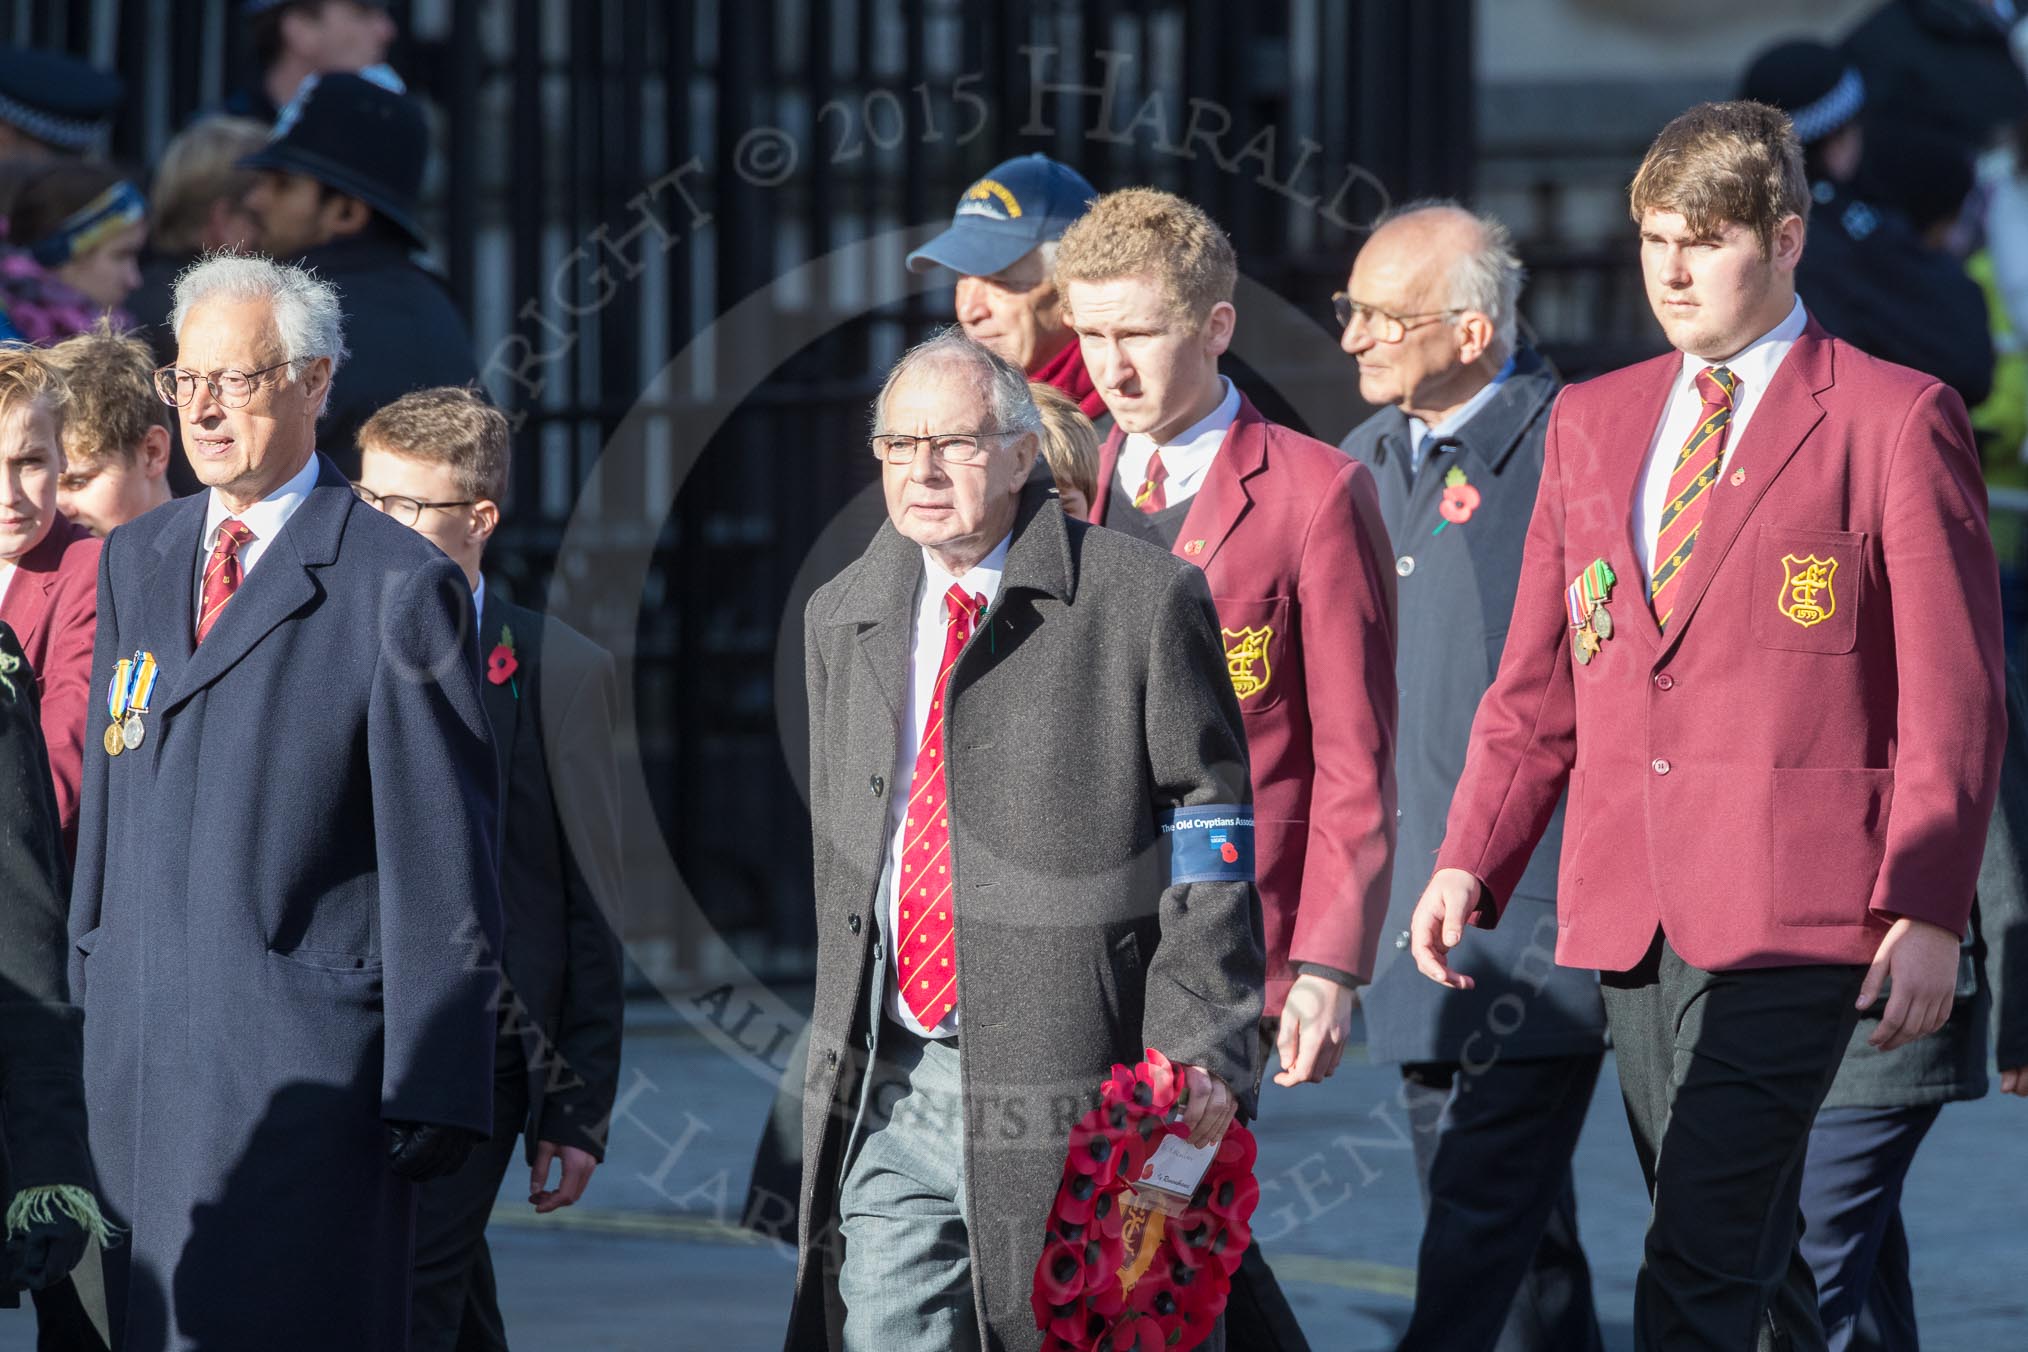 March Past, Remembrance Sunday at the Cenotaph 2016: M20 Old Cryptians' Club.
Cenotaph, Whitehall, London SW1,
London,
Greater London,
United Kingdom,
on 13 November 2016 at 13:16, image #2653